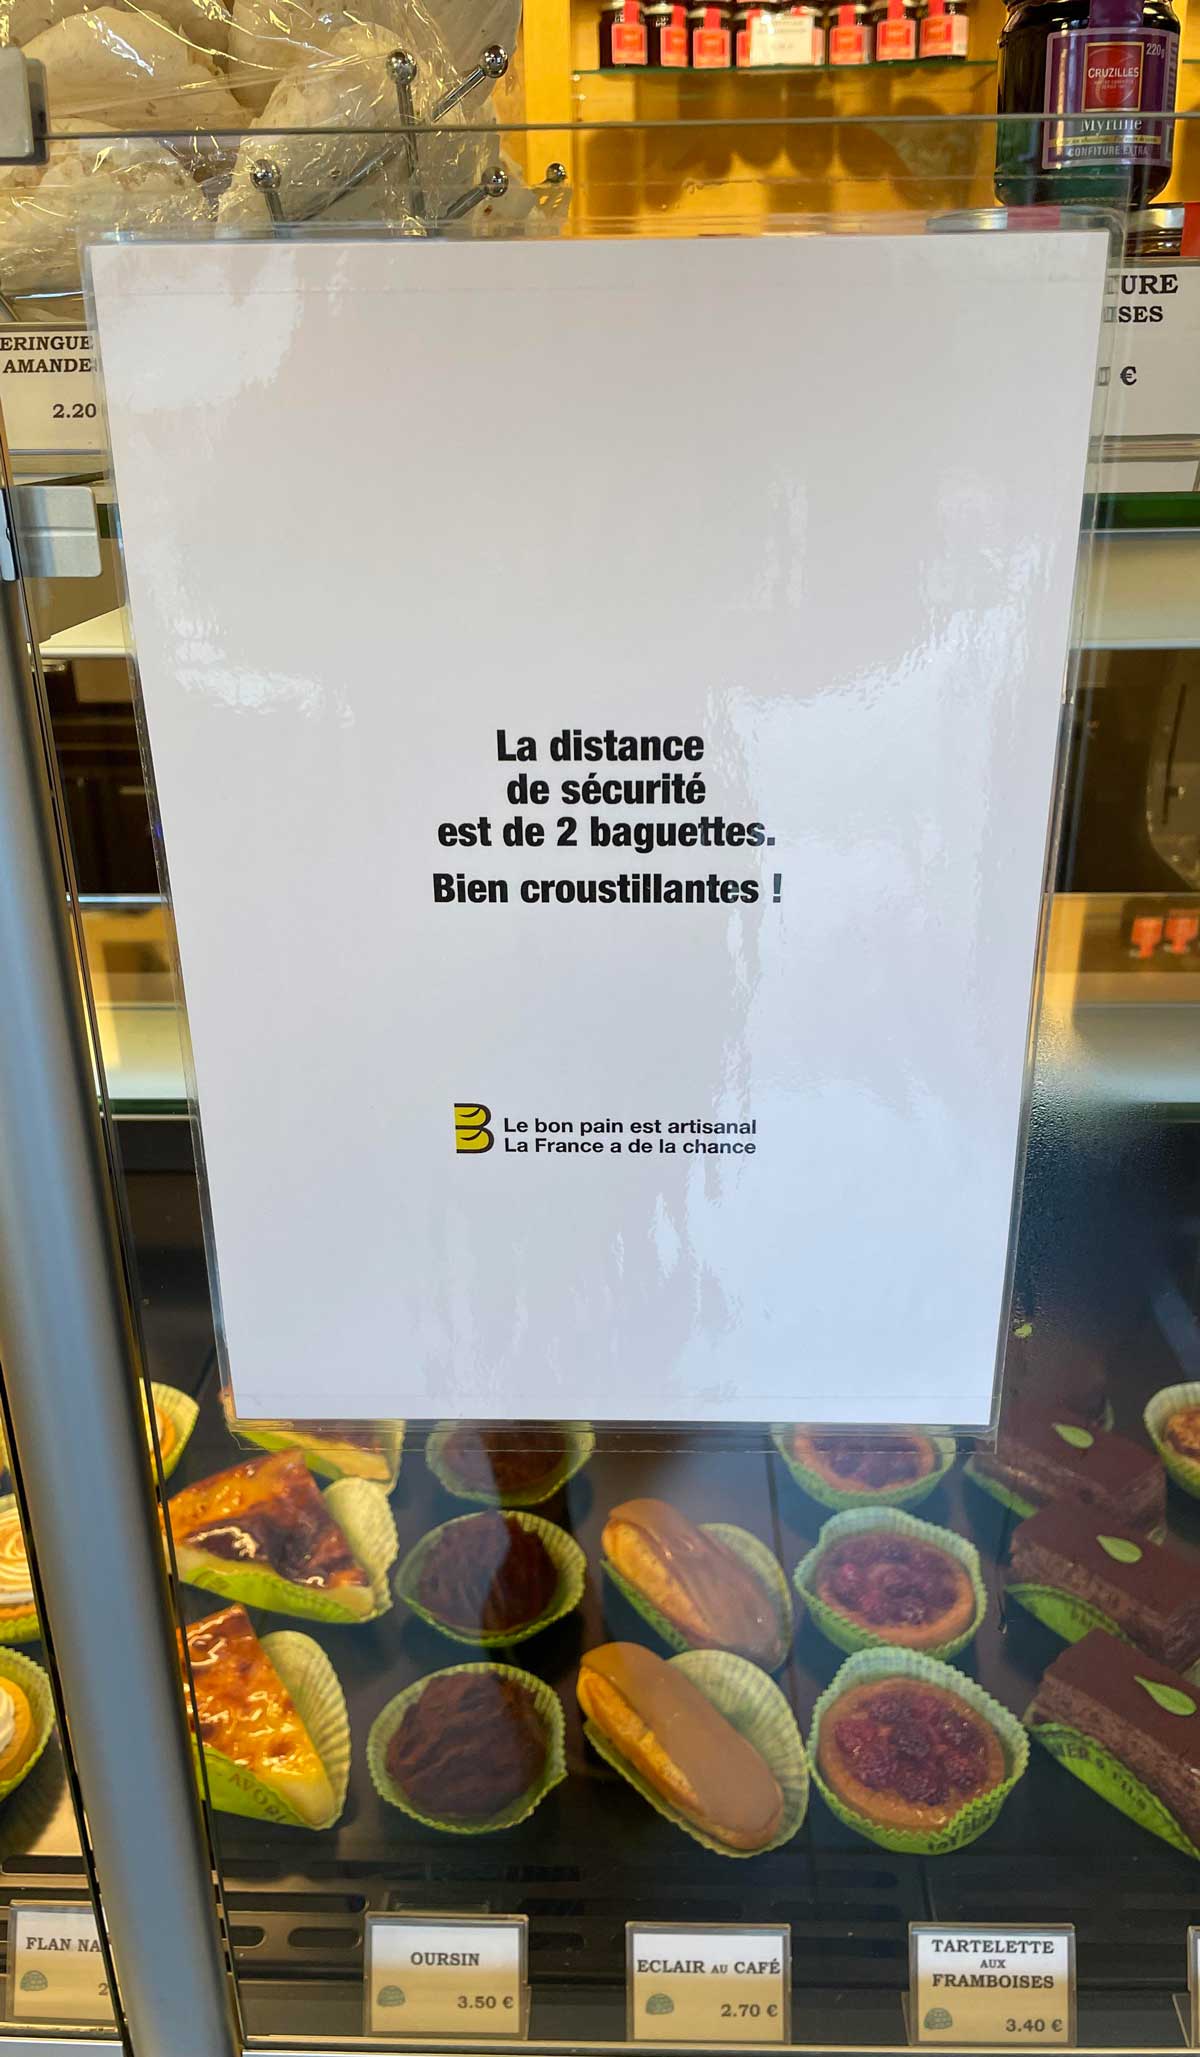 How safety distances are measured in a French bakery